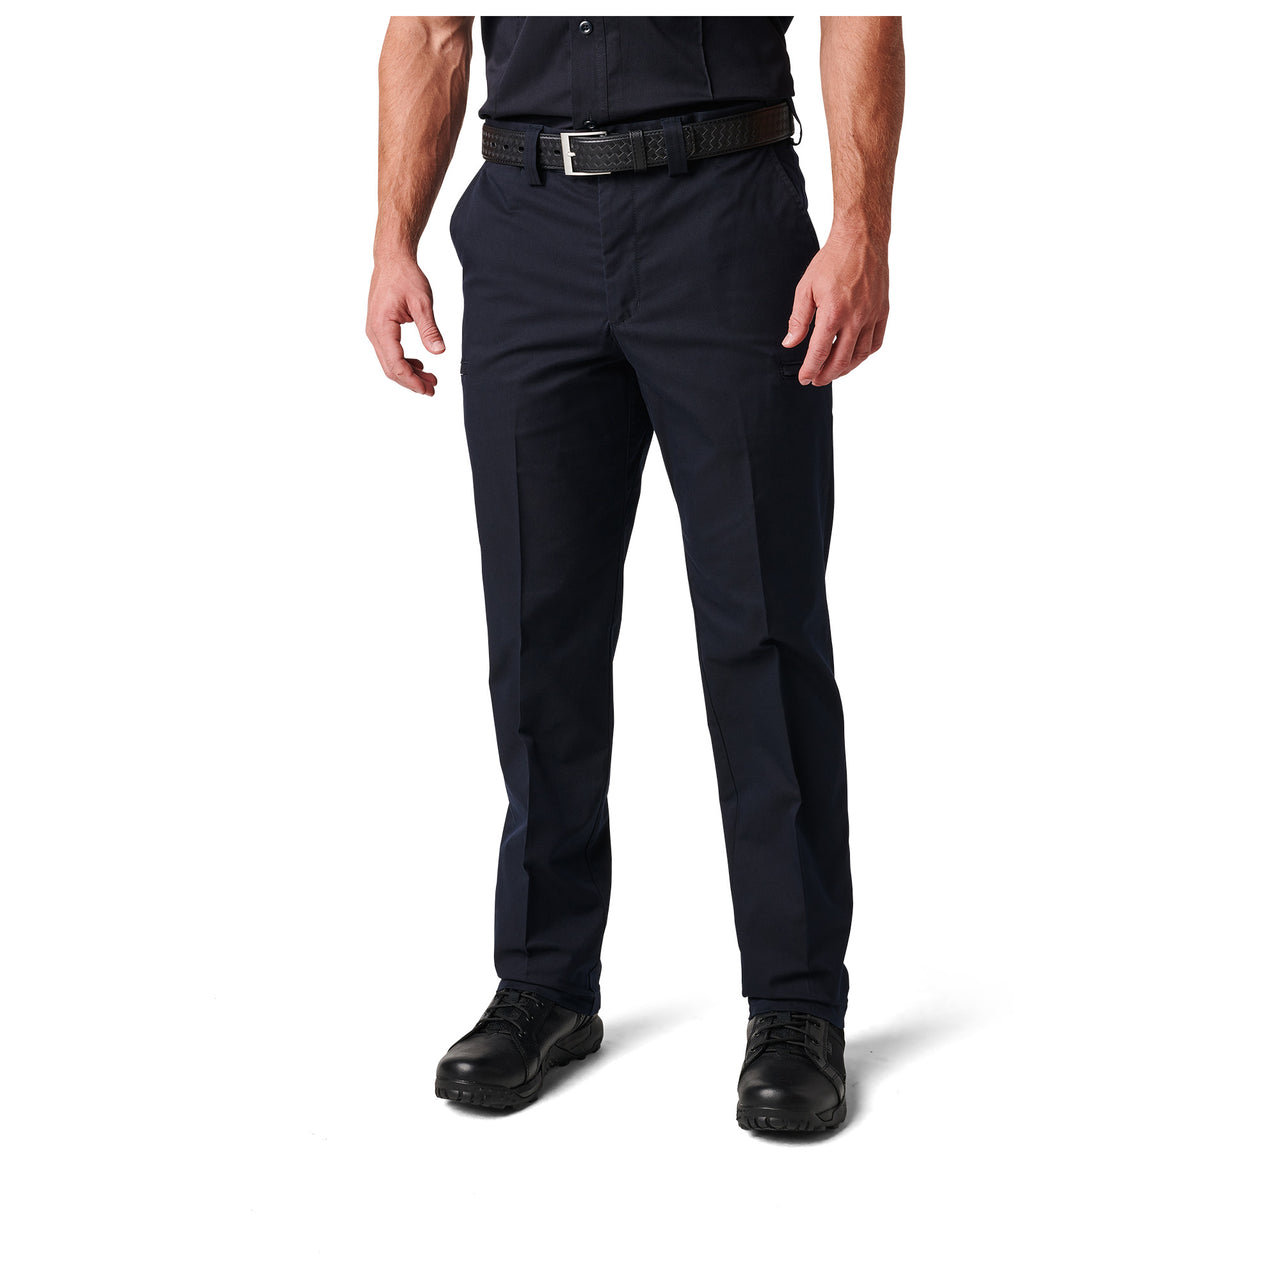 5.11 Tactical Stryke Class A PDU Twill Plus Pant (74545) | The Fire Center | The Fire Store | Store | Fuego Fire Center The 5.11 Stryke® PDU® Plus Class A Pant is constructed in our Flex-Tac® mechanical stretch twill fabric with reinforced bartacking, a Teflon™ finish for stain and soil resistance plus a low-profile cargo pockets at the thigh.